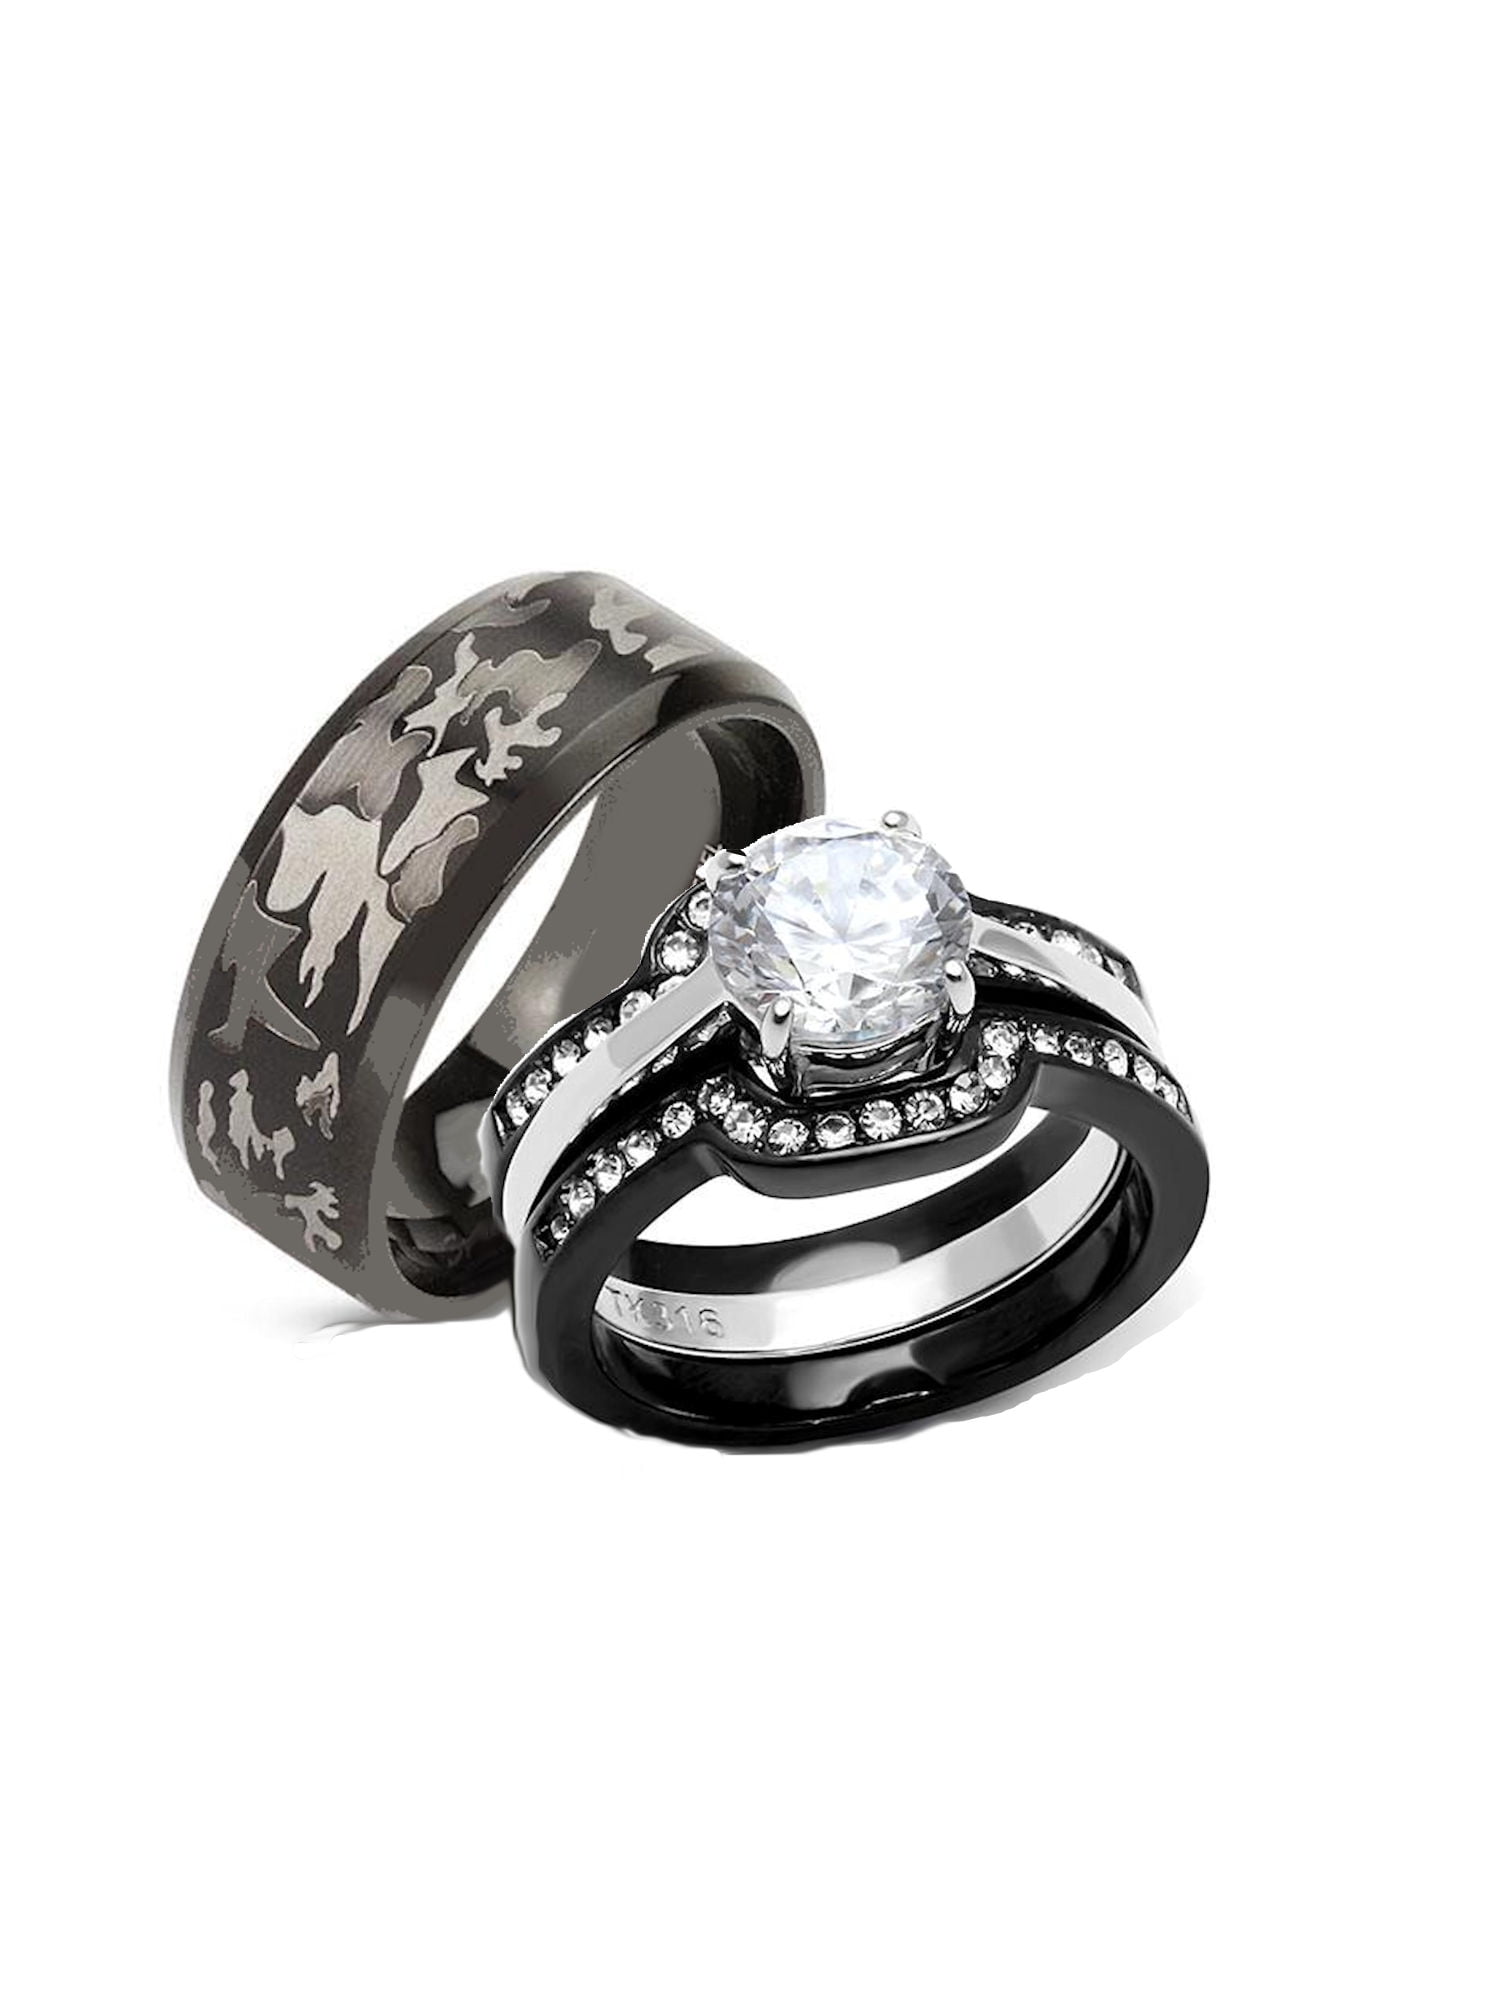 Titanium Camo Stainless Steel Wedding Ring Set His & Her Black Sterling Silver 